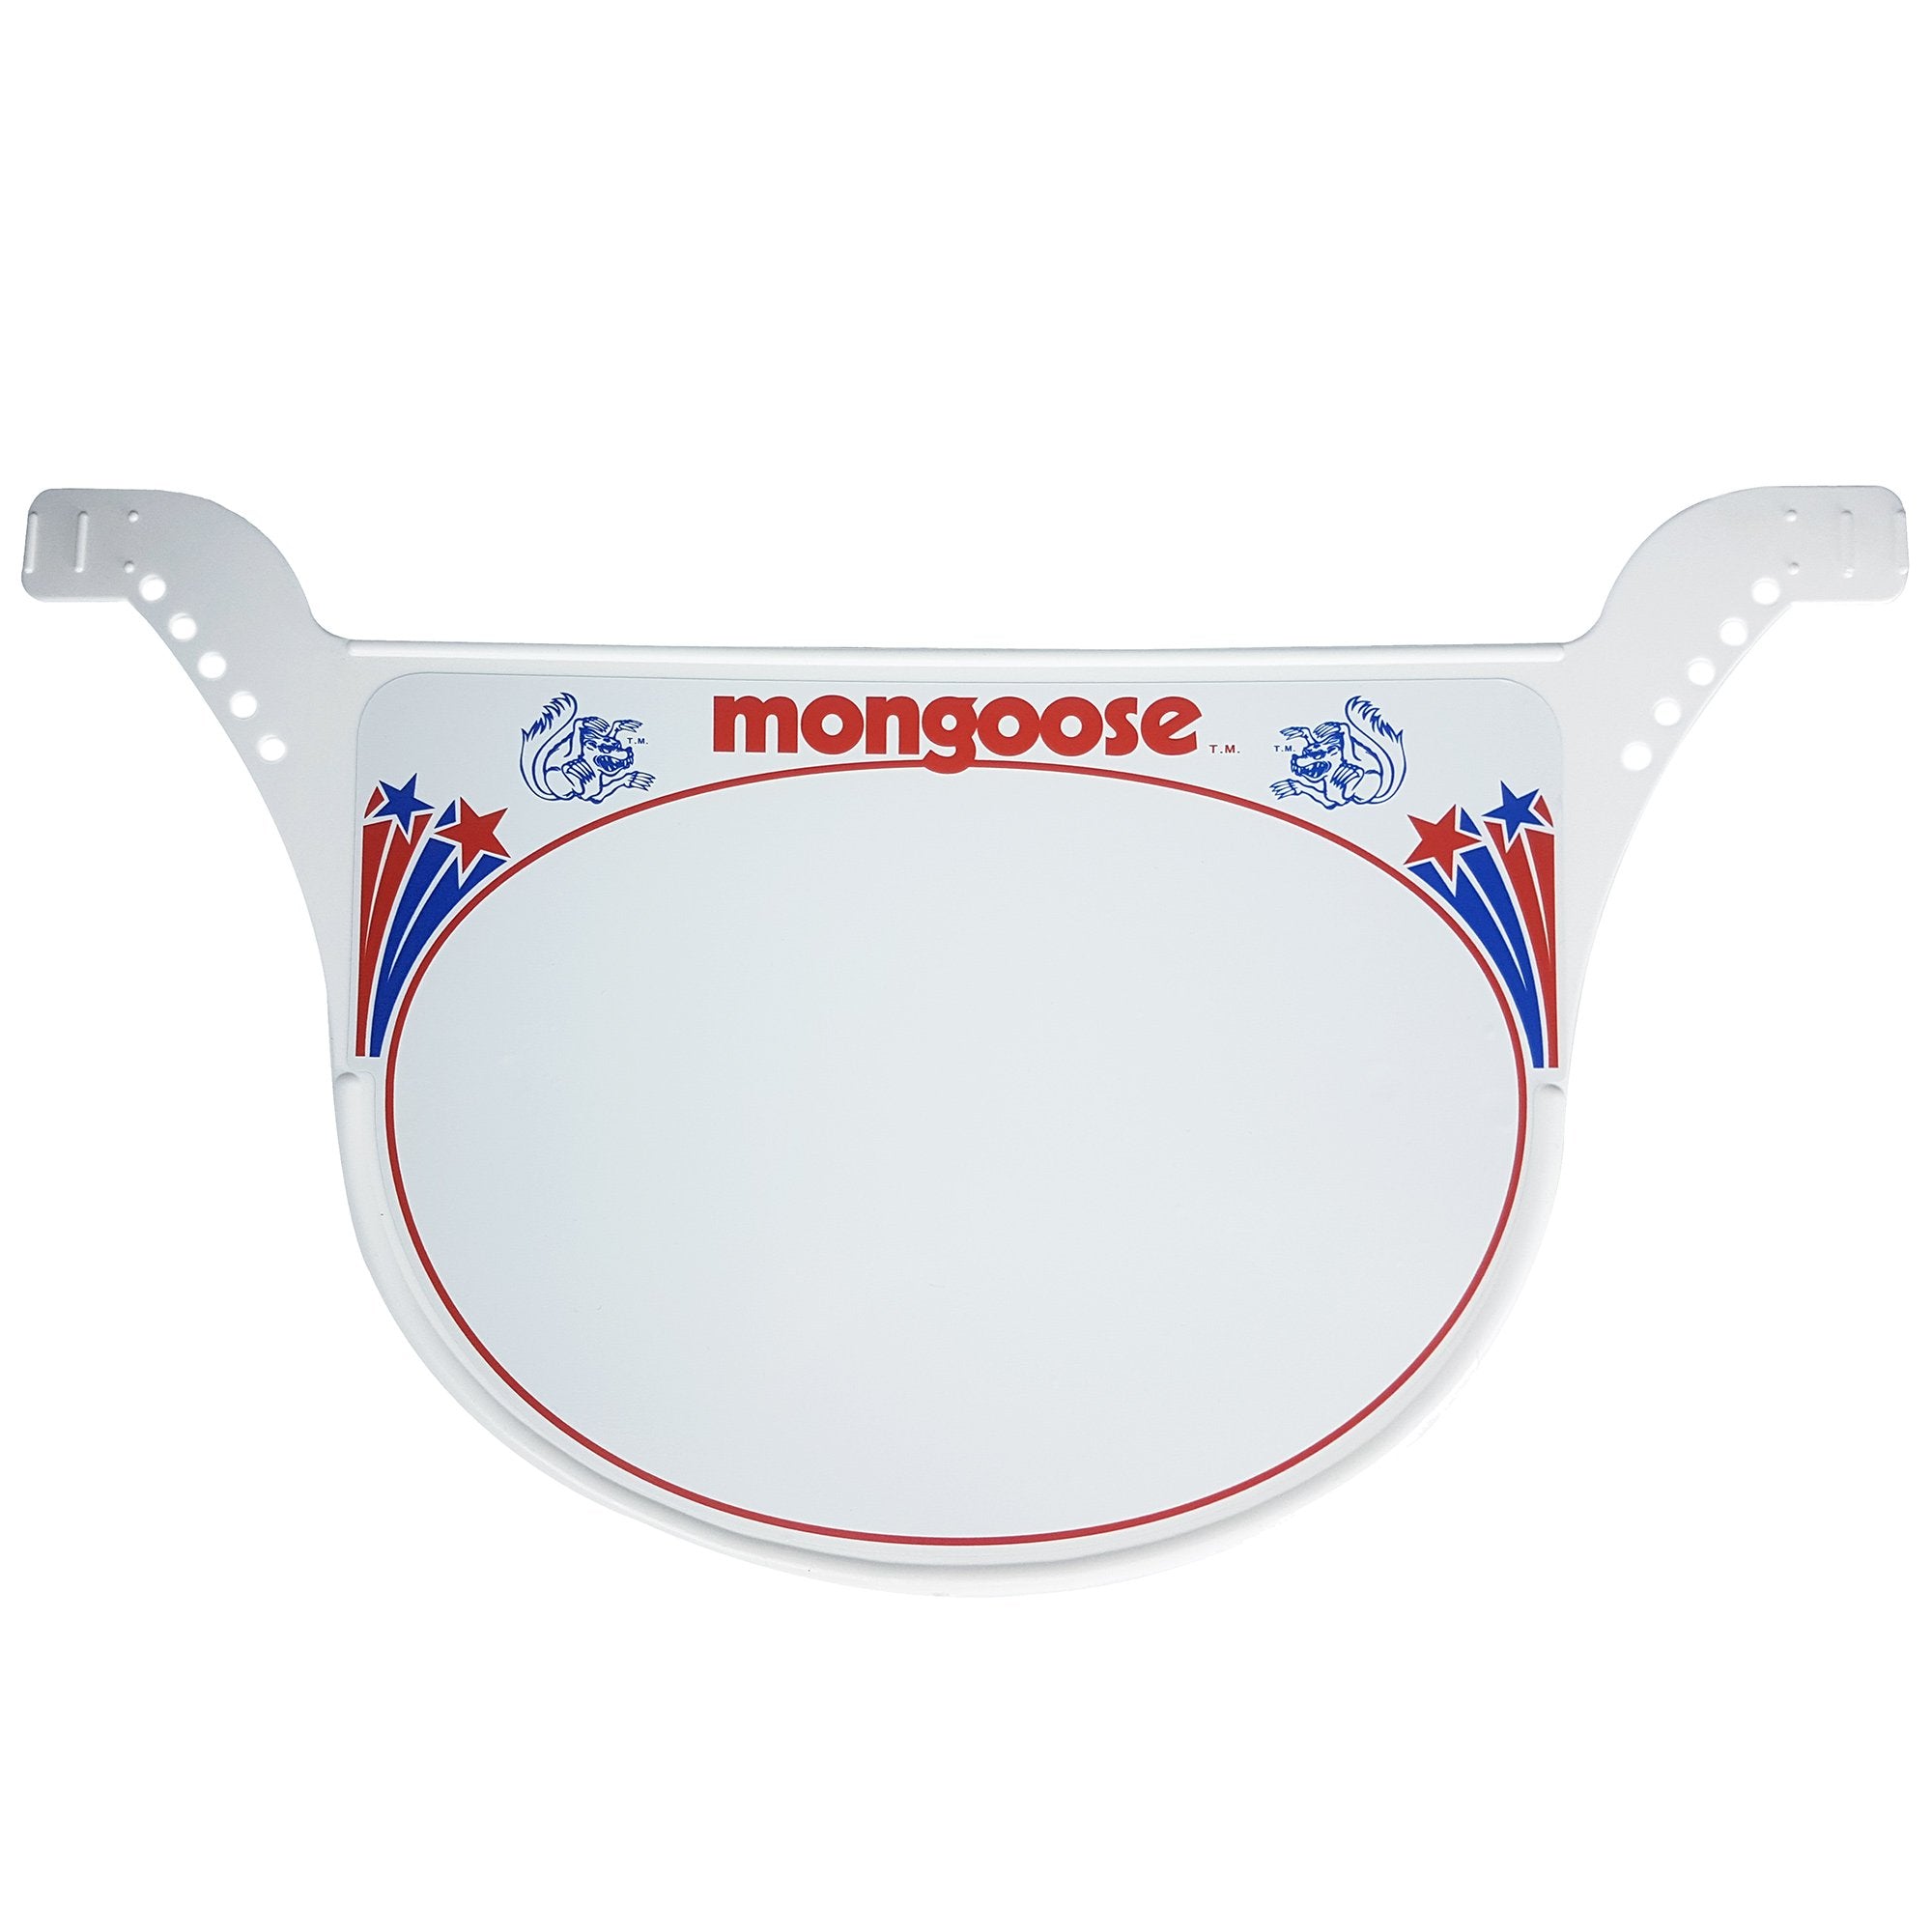 Mongoose Race Plate White - Old School Bmx